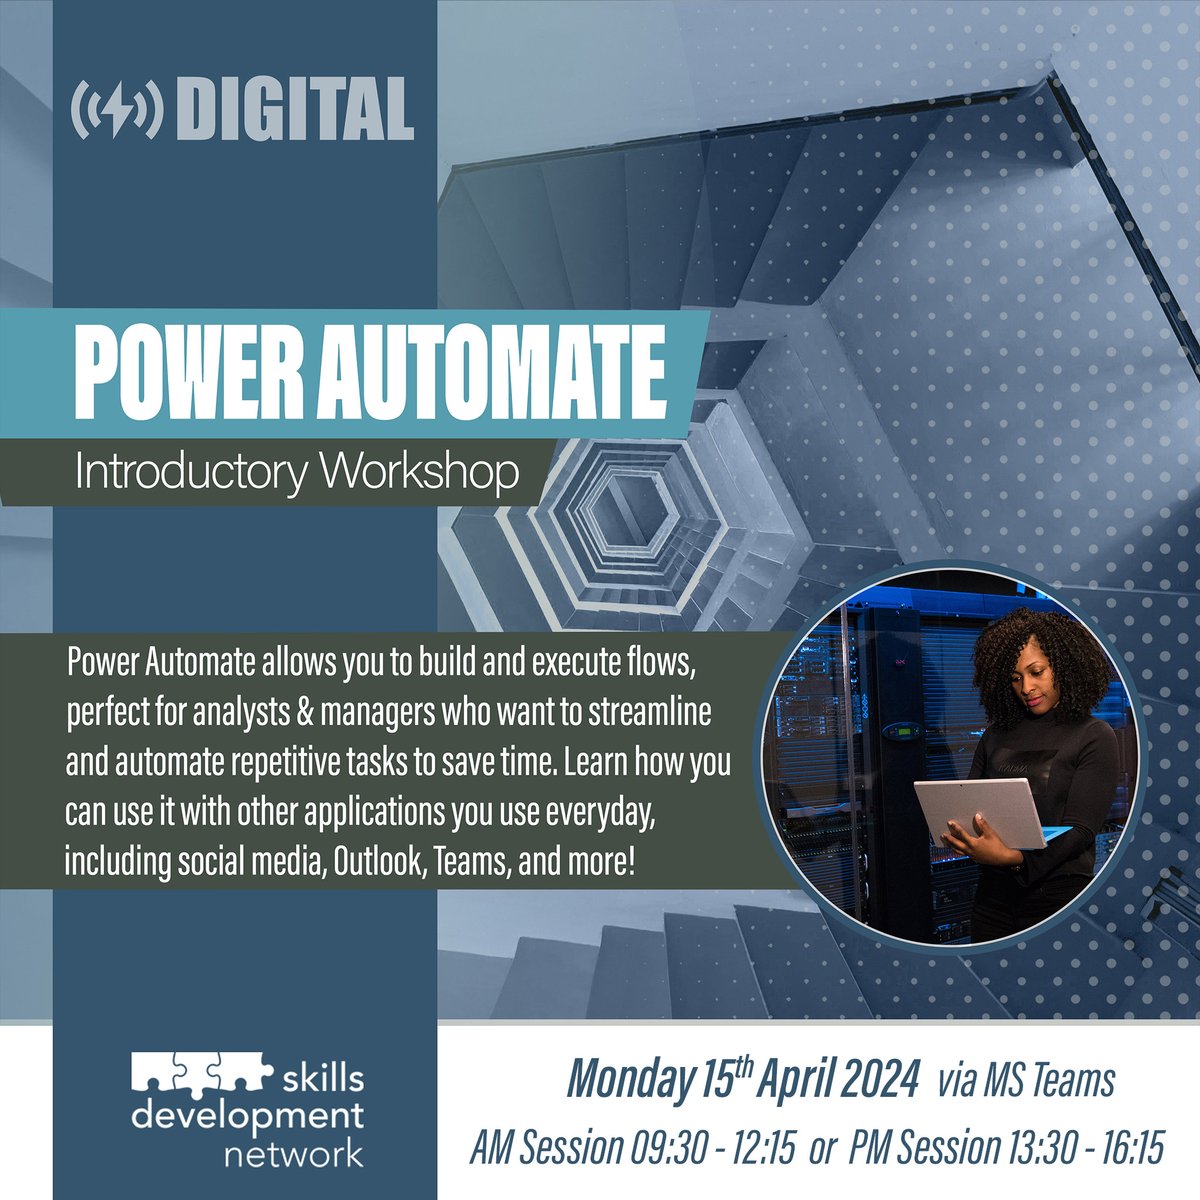 Make your Microsoft Apps work for you with Power Automate! Streamline & simplify workflows, by automating repetitive tasks & processes, letting all your apps work together without you having to click a thing! AM: orlo.uk/lsZMX PM: orlo.uk/vQi4h